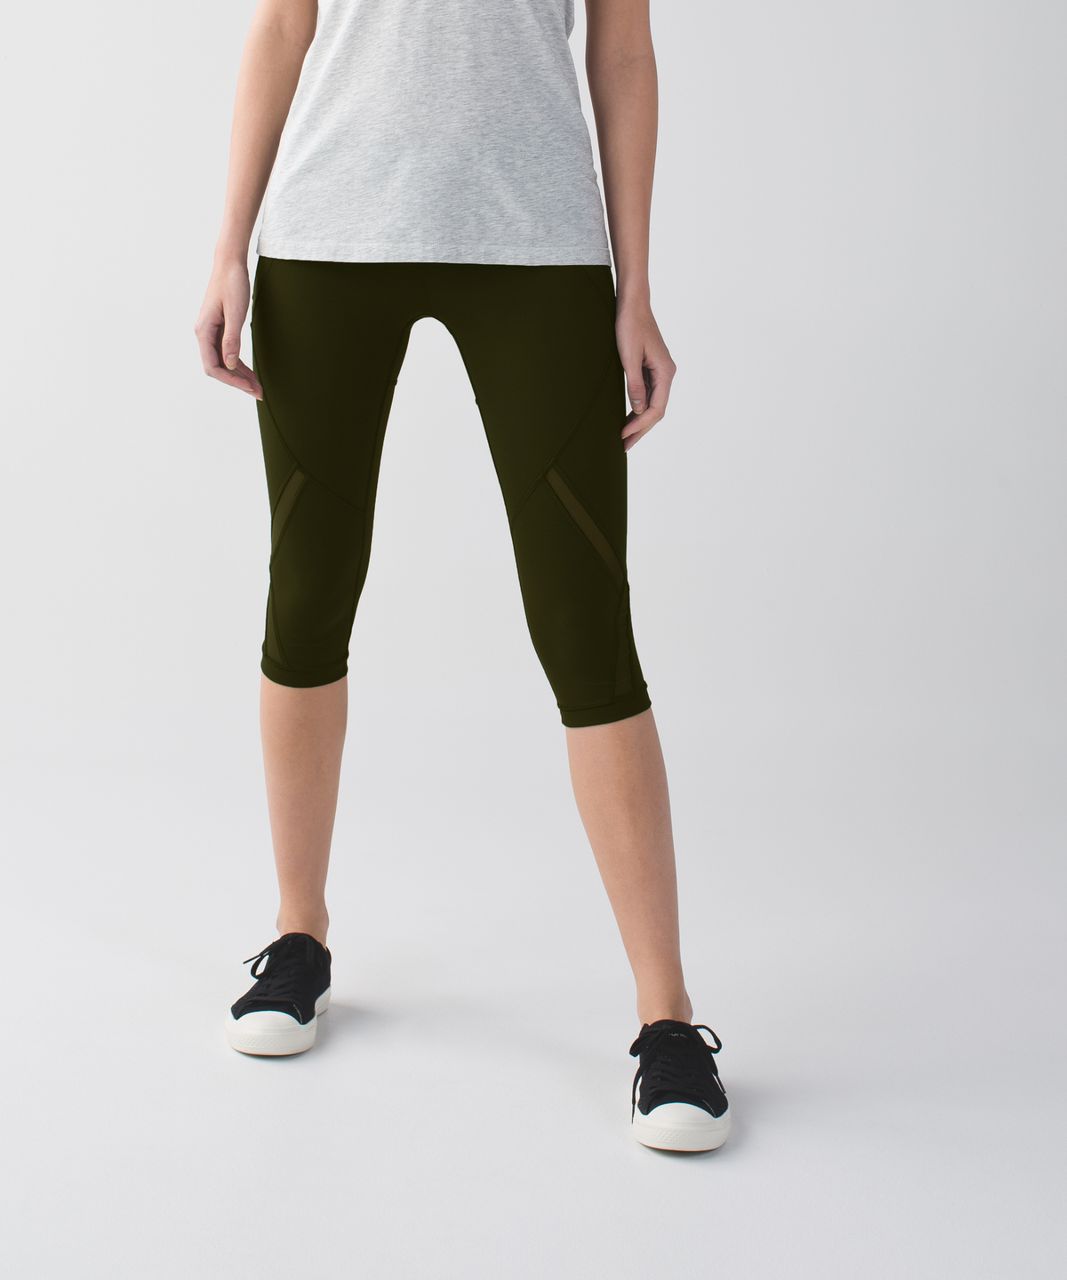 Lululemon palm party gator green training tough crops - Agent Athletica